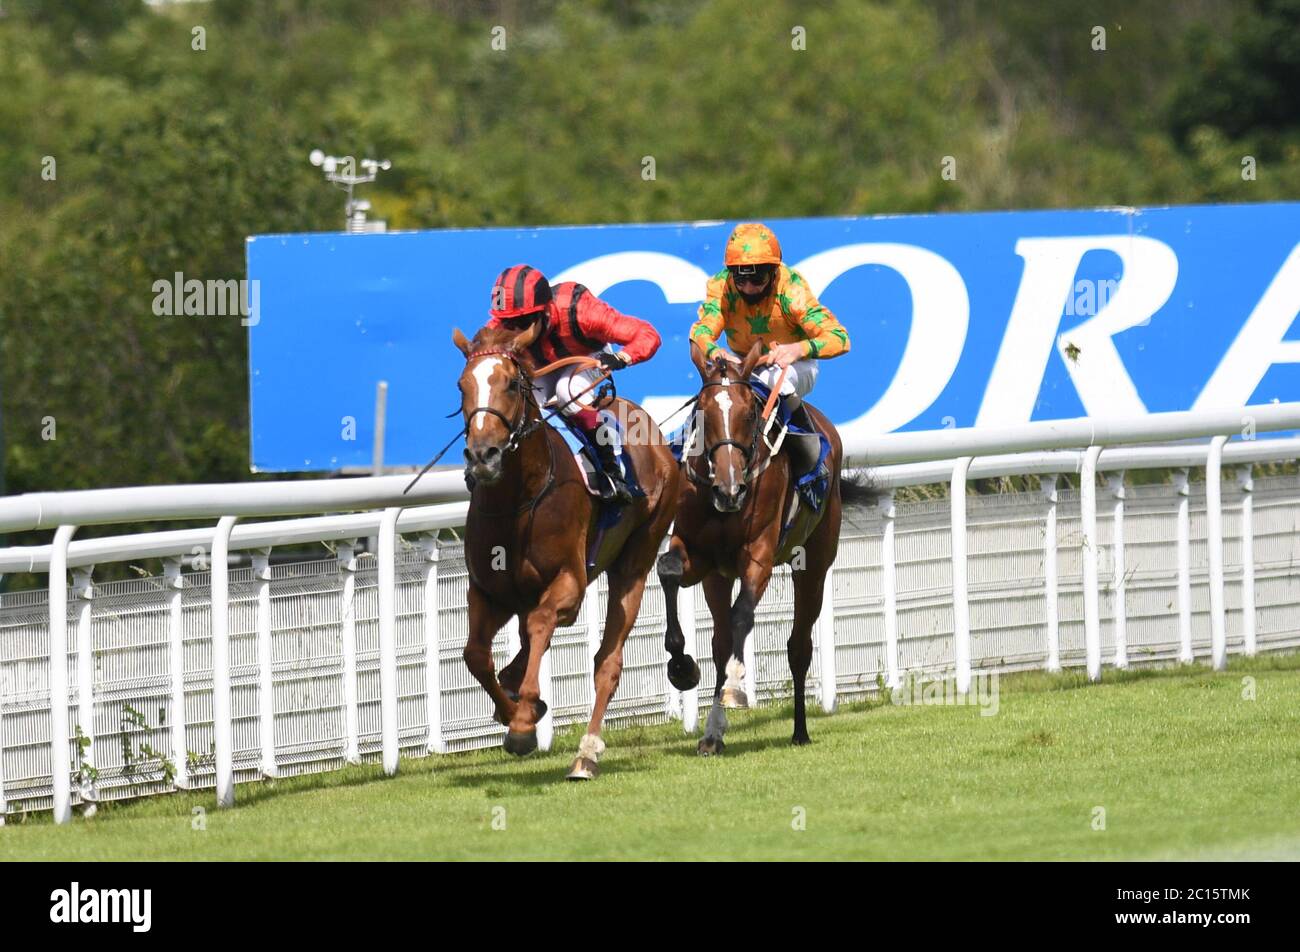 Bright Eyed Eagle ridden by Oisin Murphy (left) veers left causing Joe Fanning to snatch up on Glenties resulting in a steward's enquiry where the result stood at Goodwood Racecourse. Stock Photo